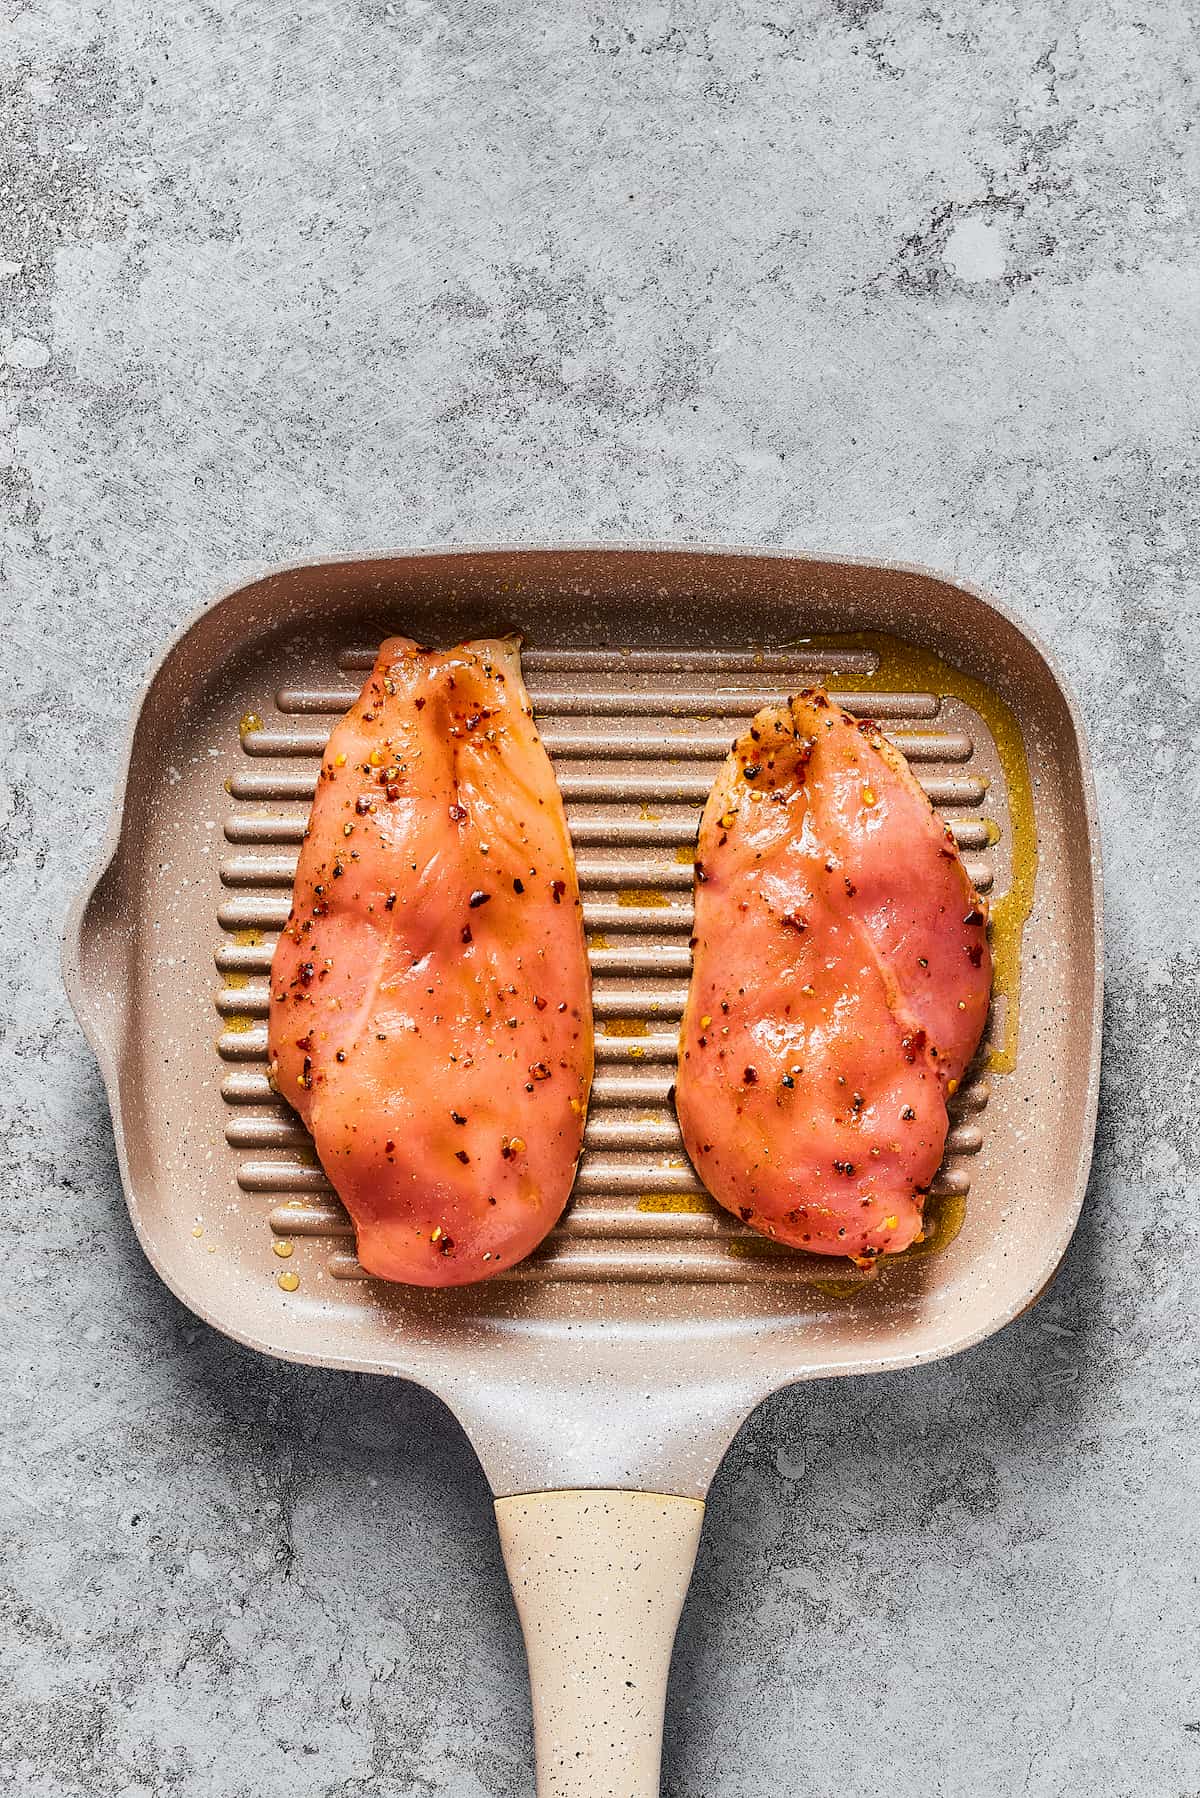 Chicken breasts on a grill pan